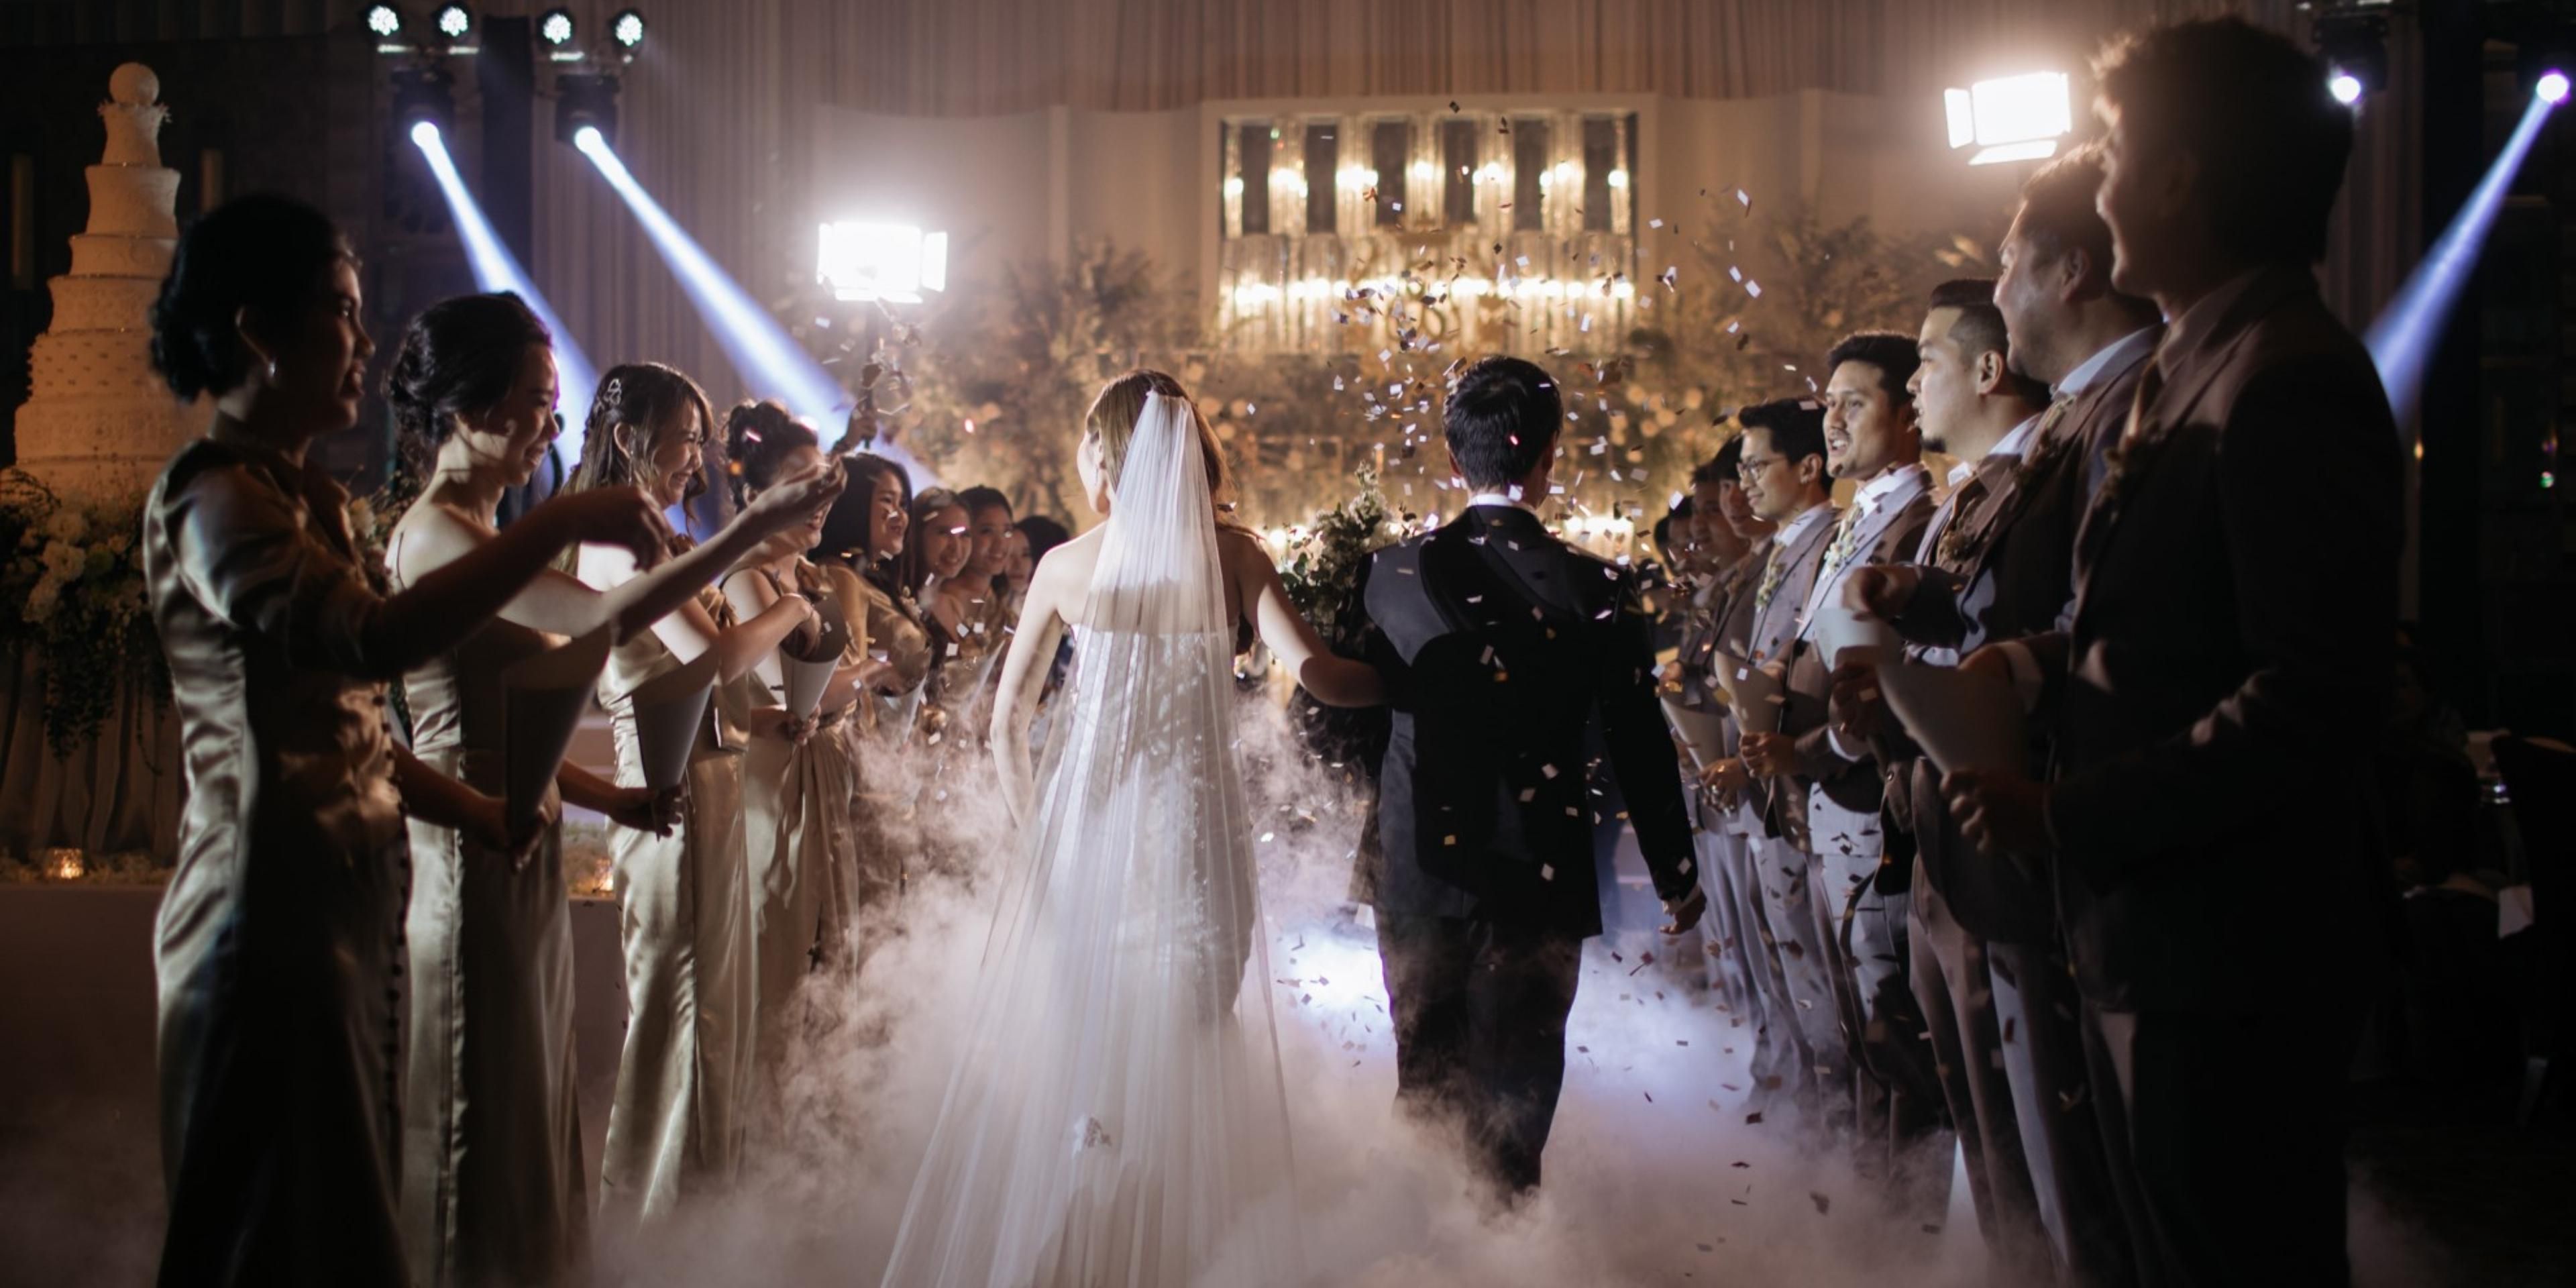 InterContinental Bangkok has been fulfilling the dreams of couples for many years. By incorporating the latest trends into elegantly tailored ceremonies, the hotel remains a highly sought-after venue to ensure an enchanting event with one of the city's largest Grand Ballroom and grand marble staircase leading bridal couples to their dream wedding